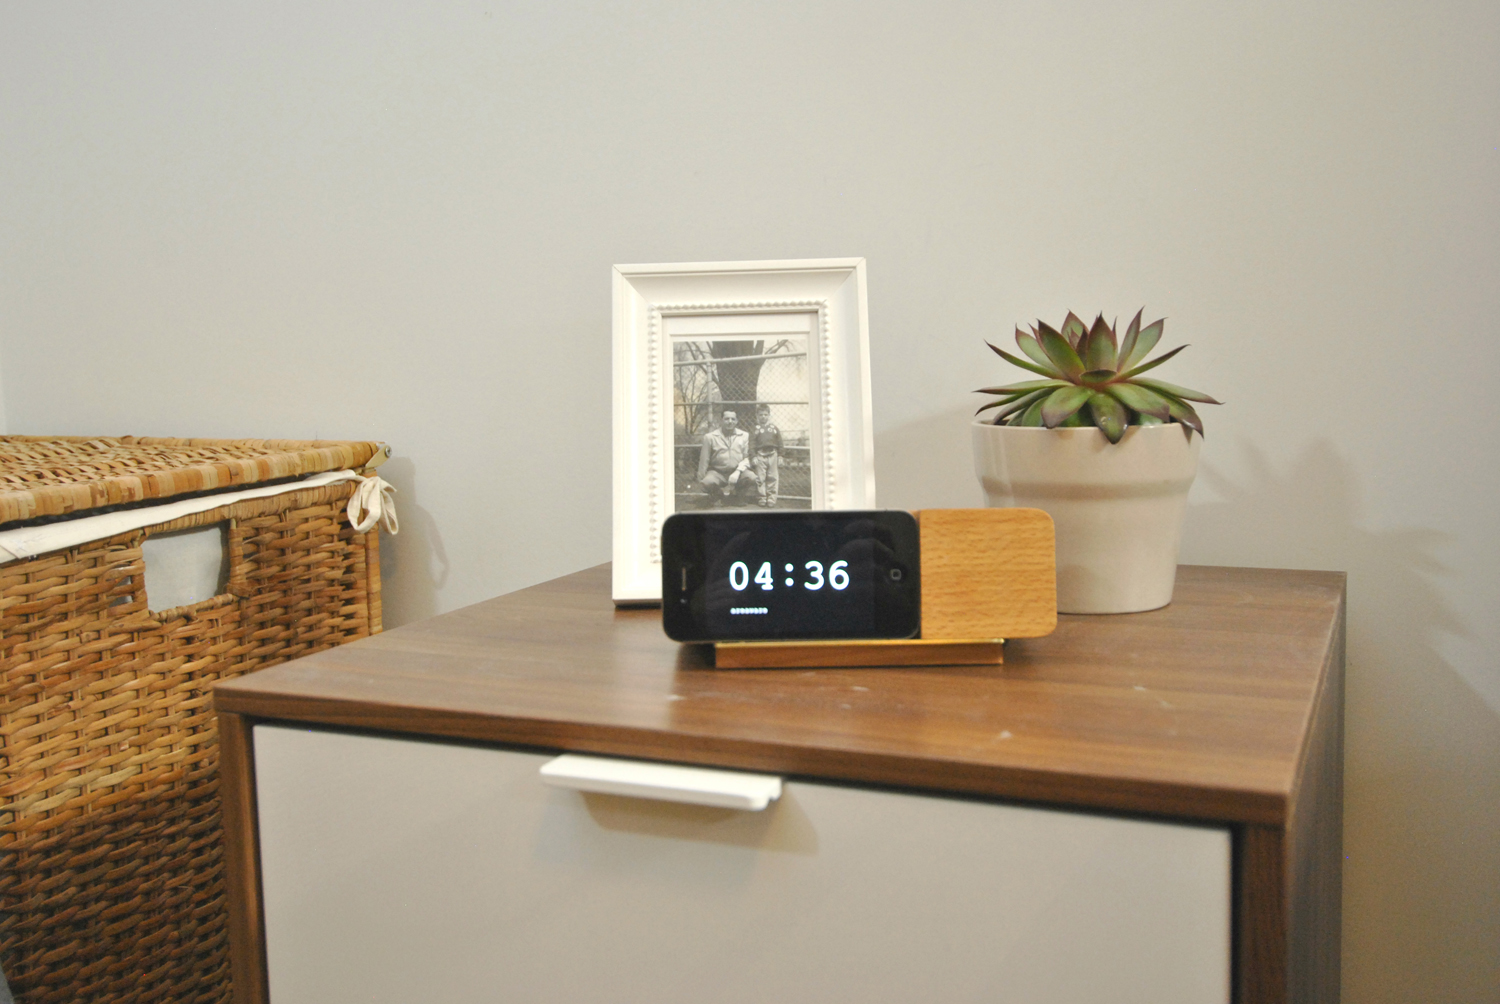 A simple nightstand in the basement apartment bedroom